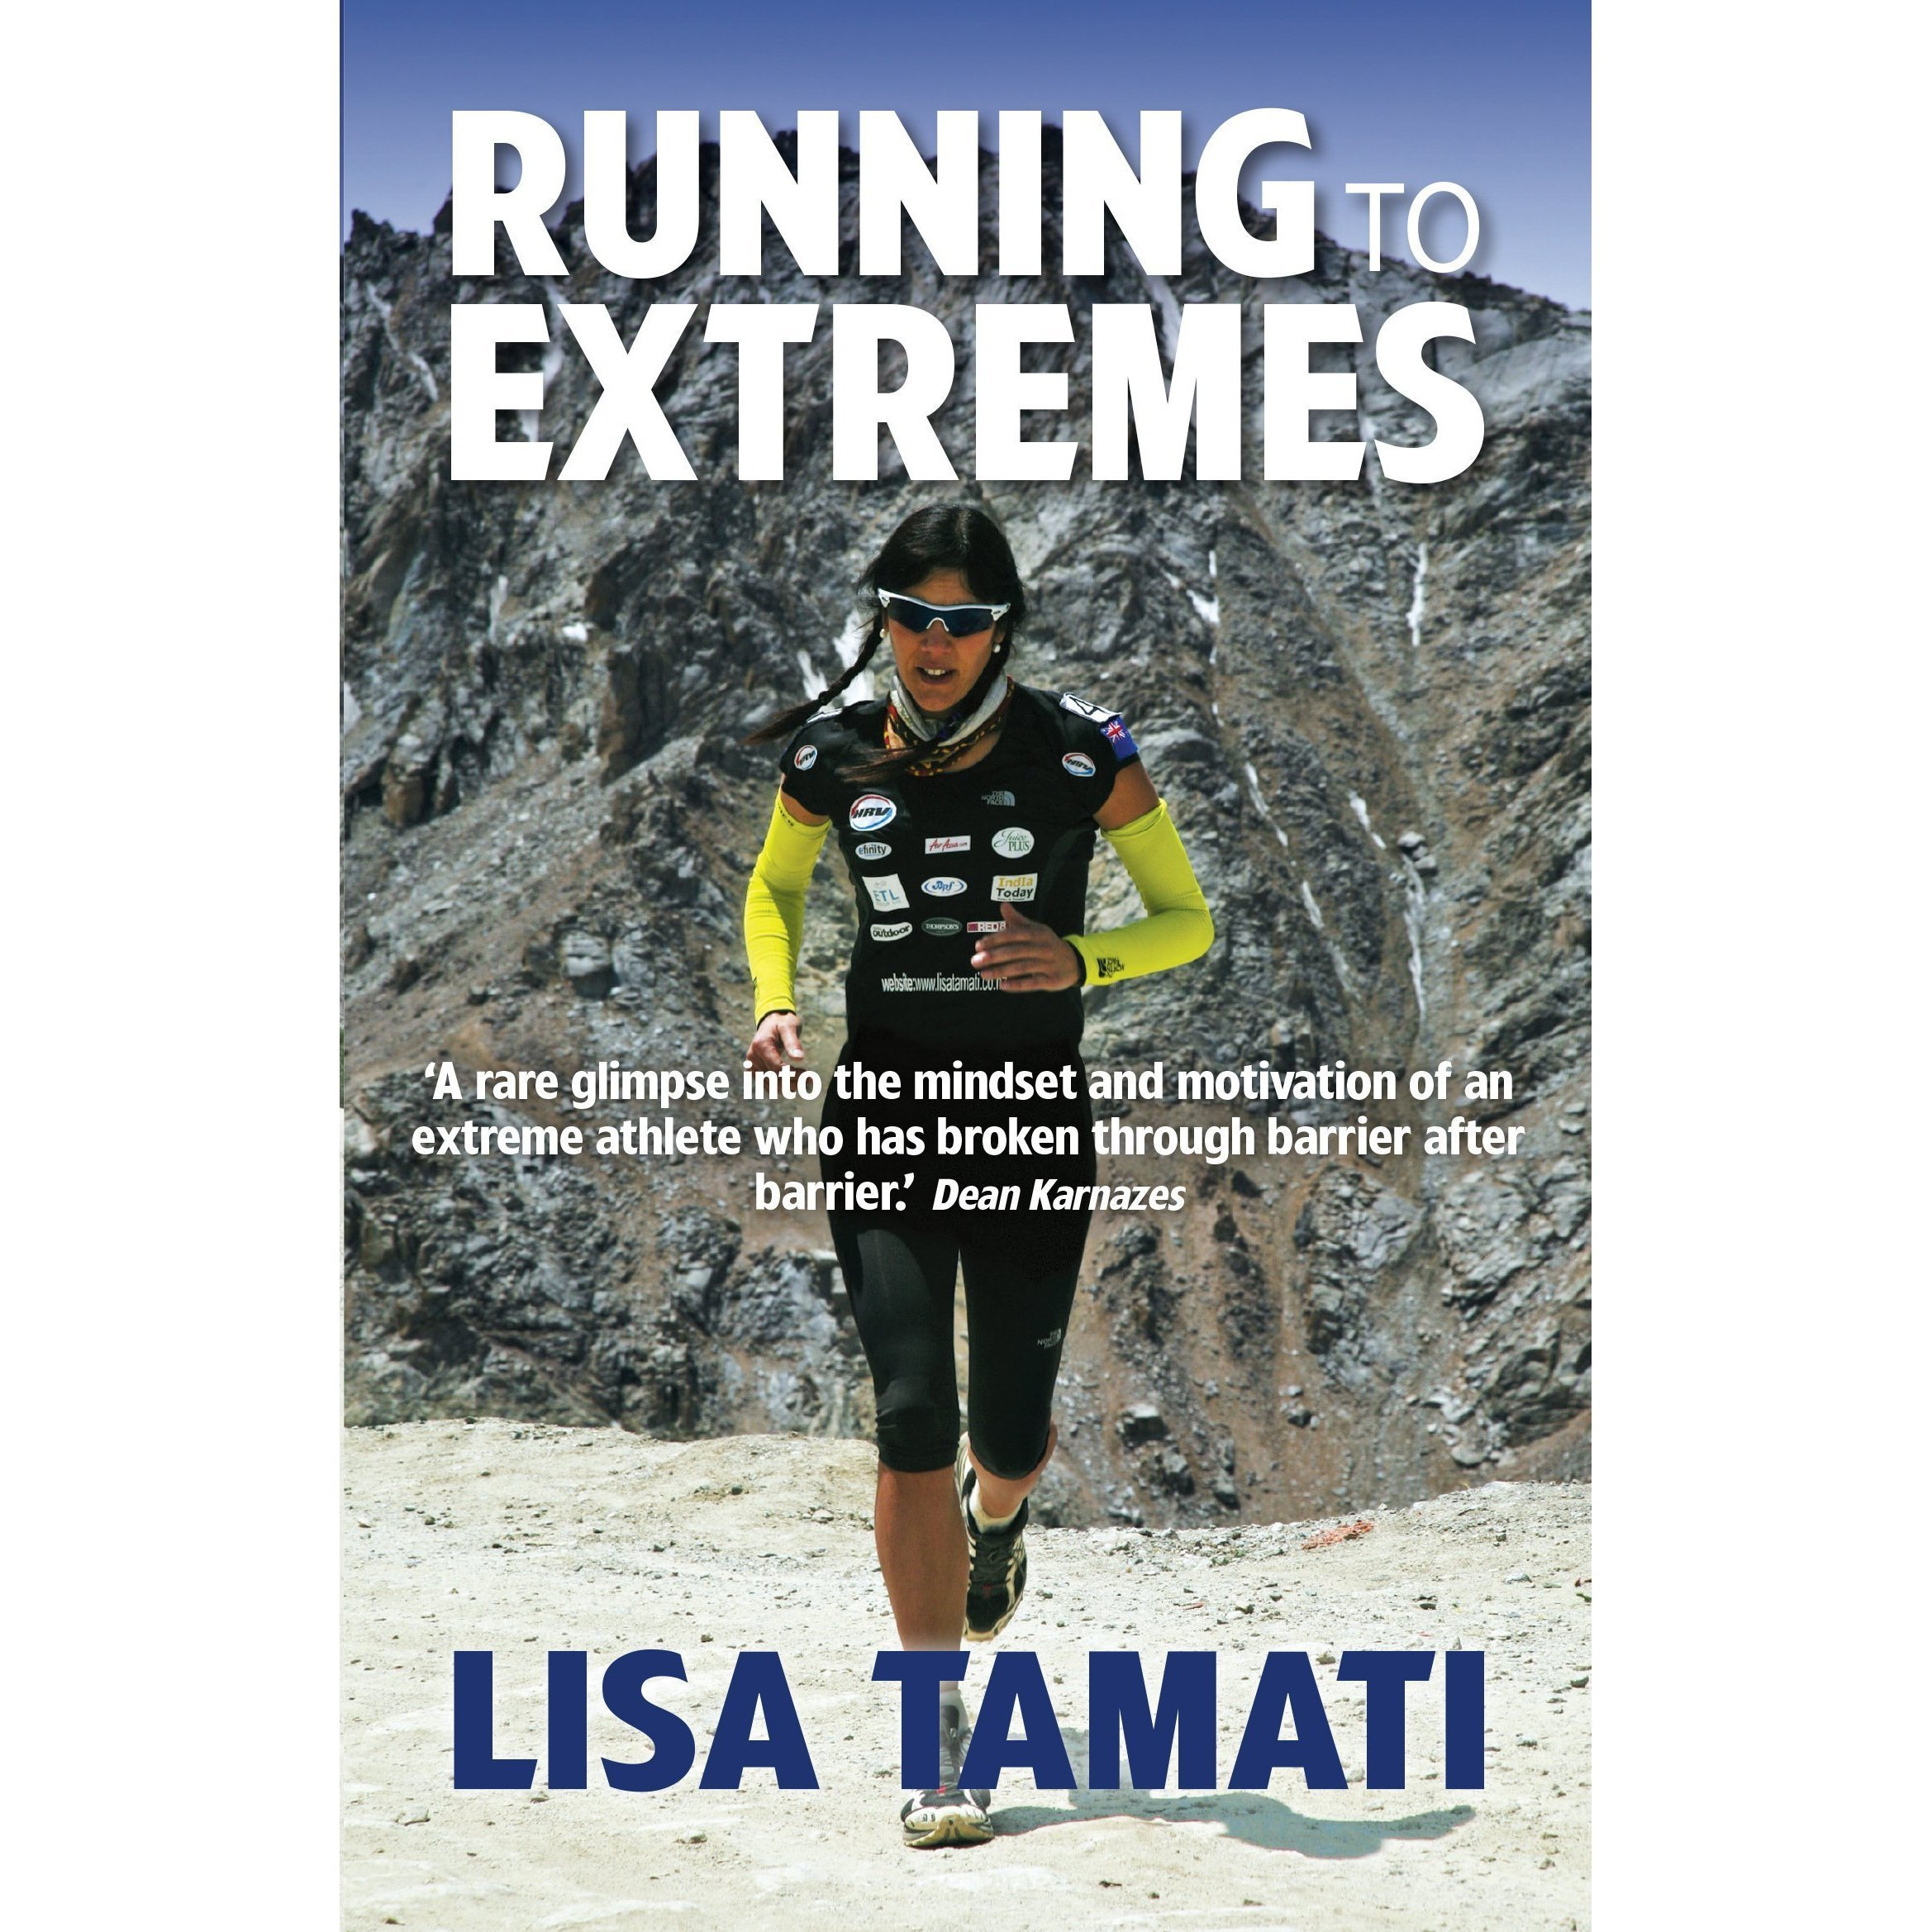 Running to Extremes by Lisa Tamati